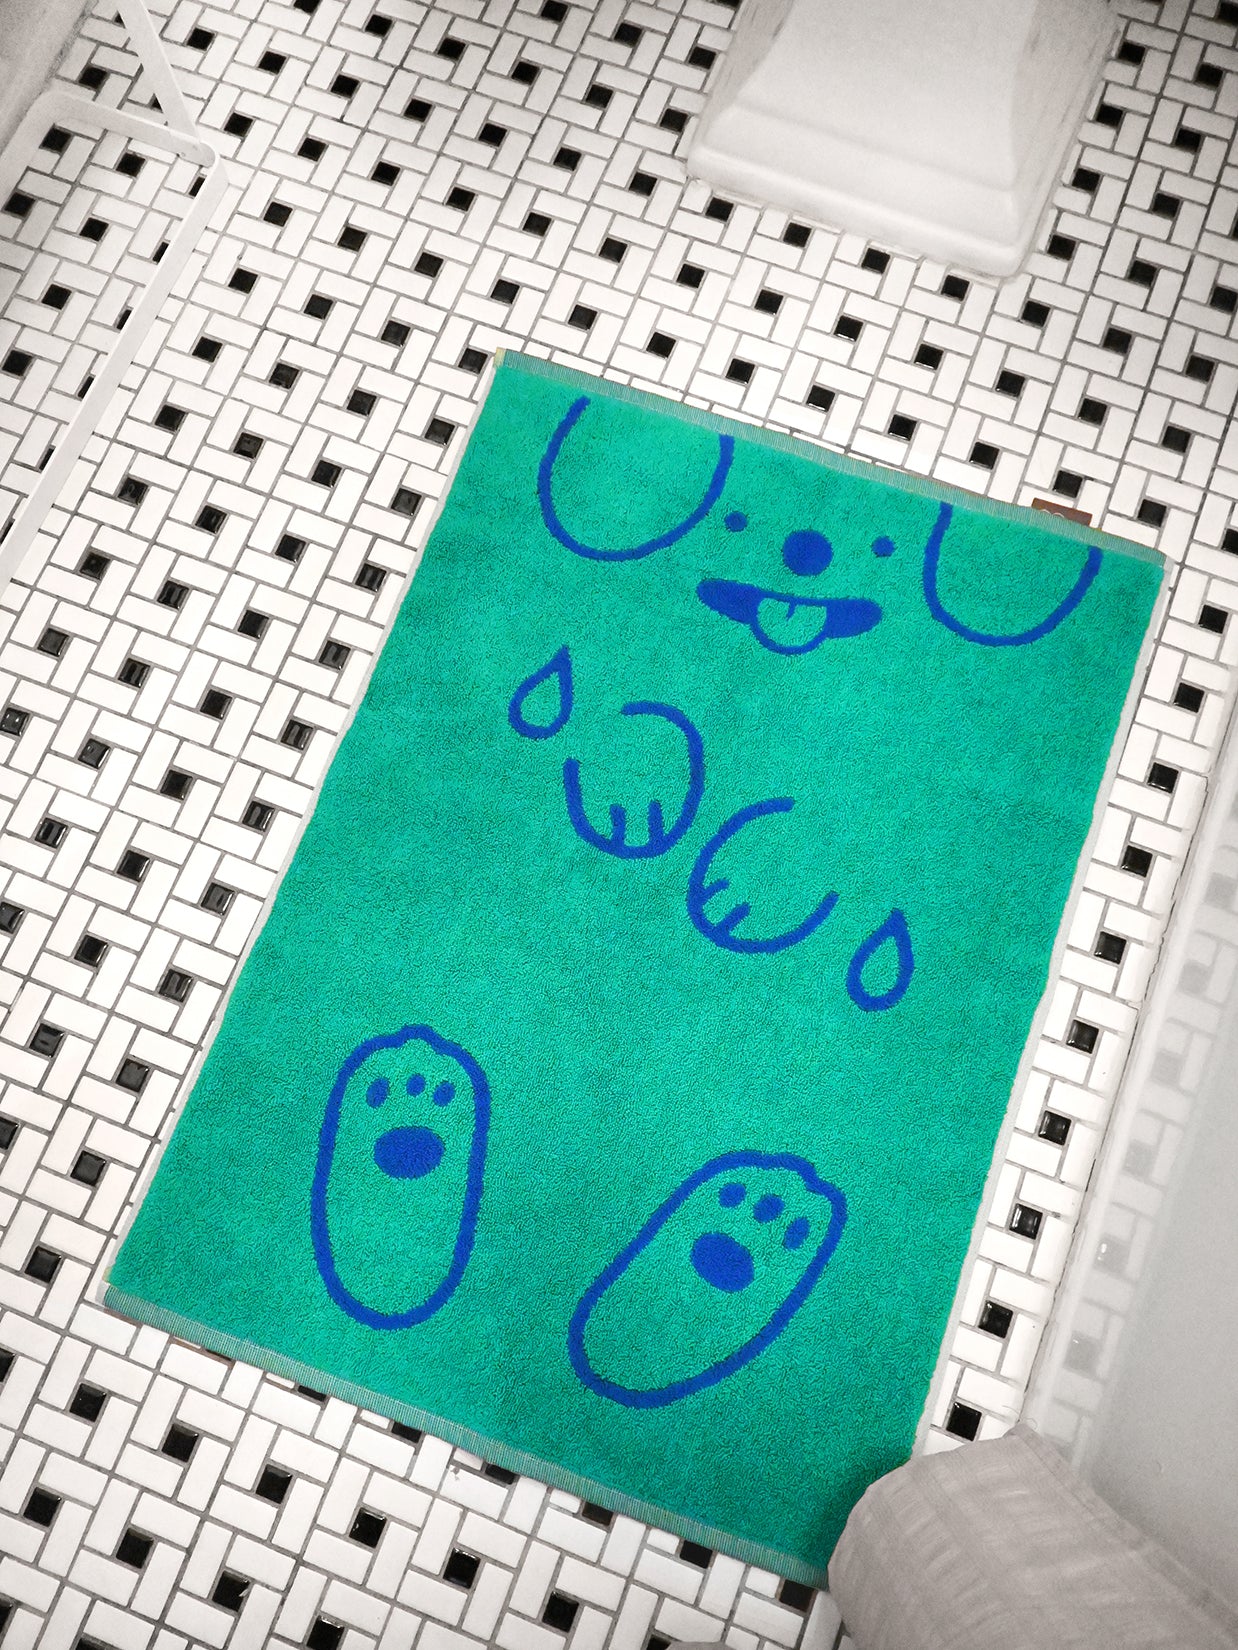 "WET DOGS" bath mat design by Natali Koromoto. Part of the "Wet Dogs" terry bath collection. Made in Portugal with BCI cotton, Oeko Tex Standard 100.